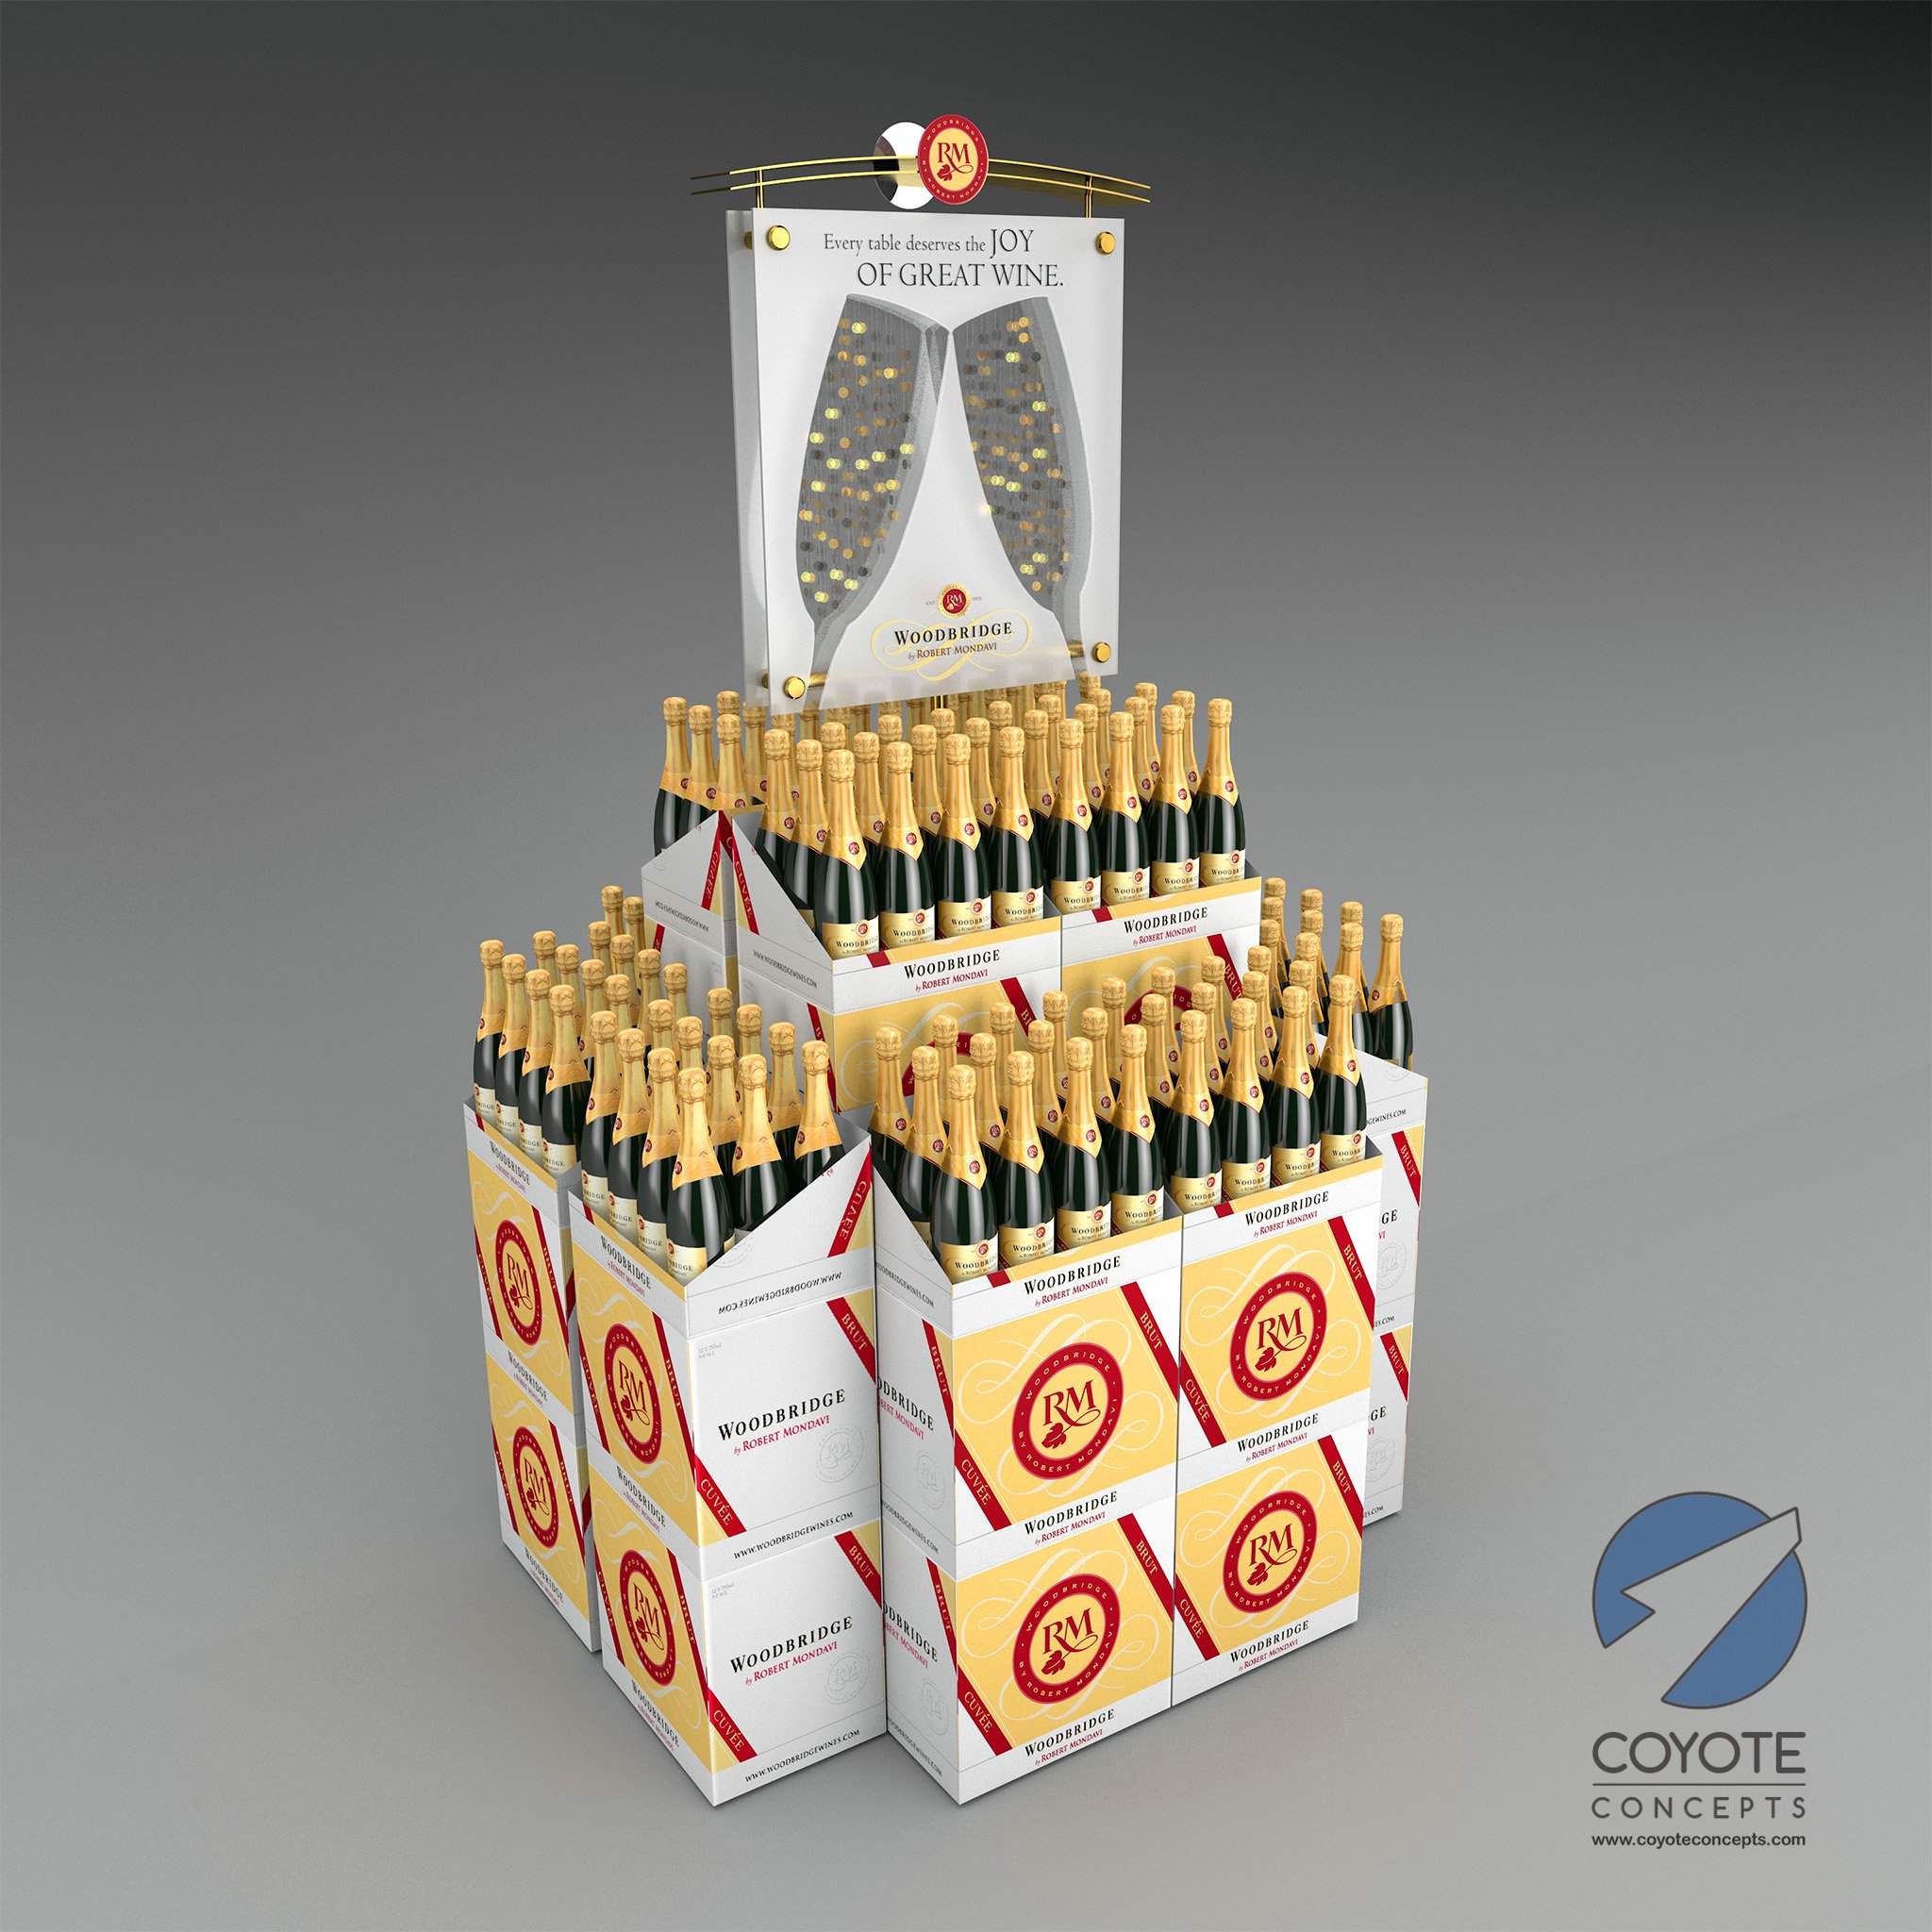 2 Sparkling Displays Ring in the Sales — Coyote Concepts, Inc.